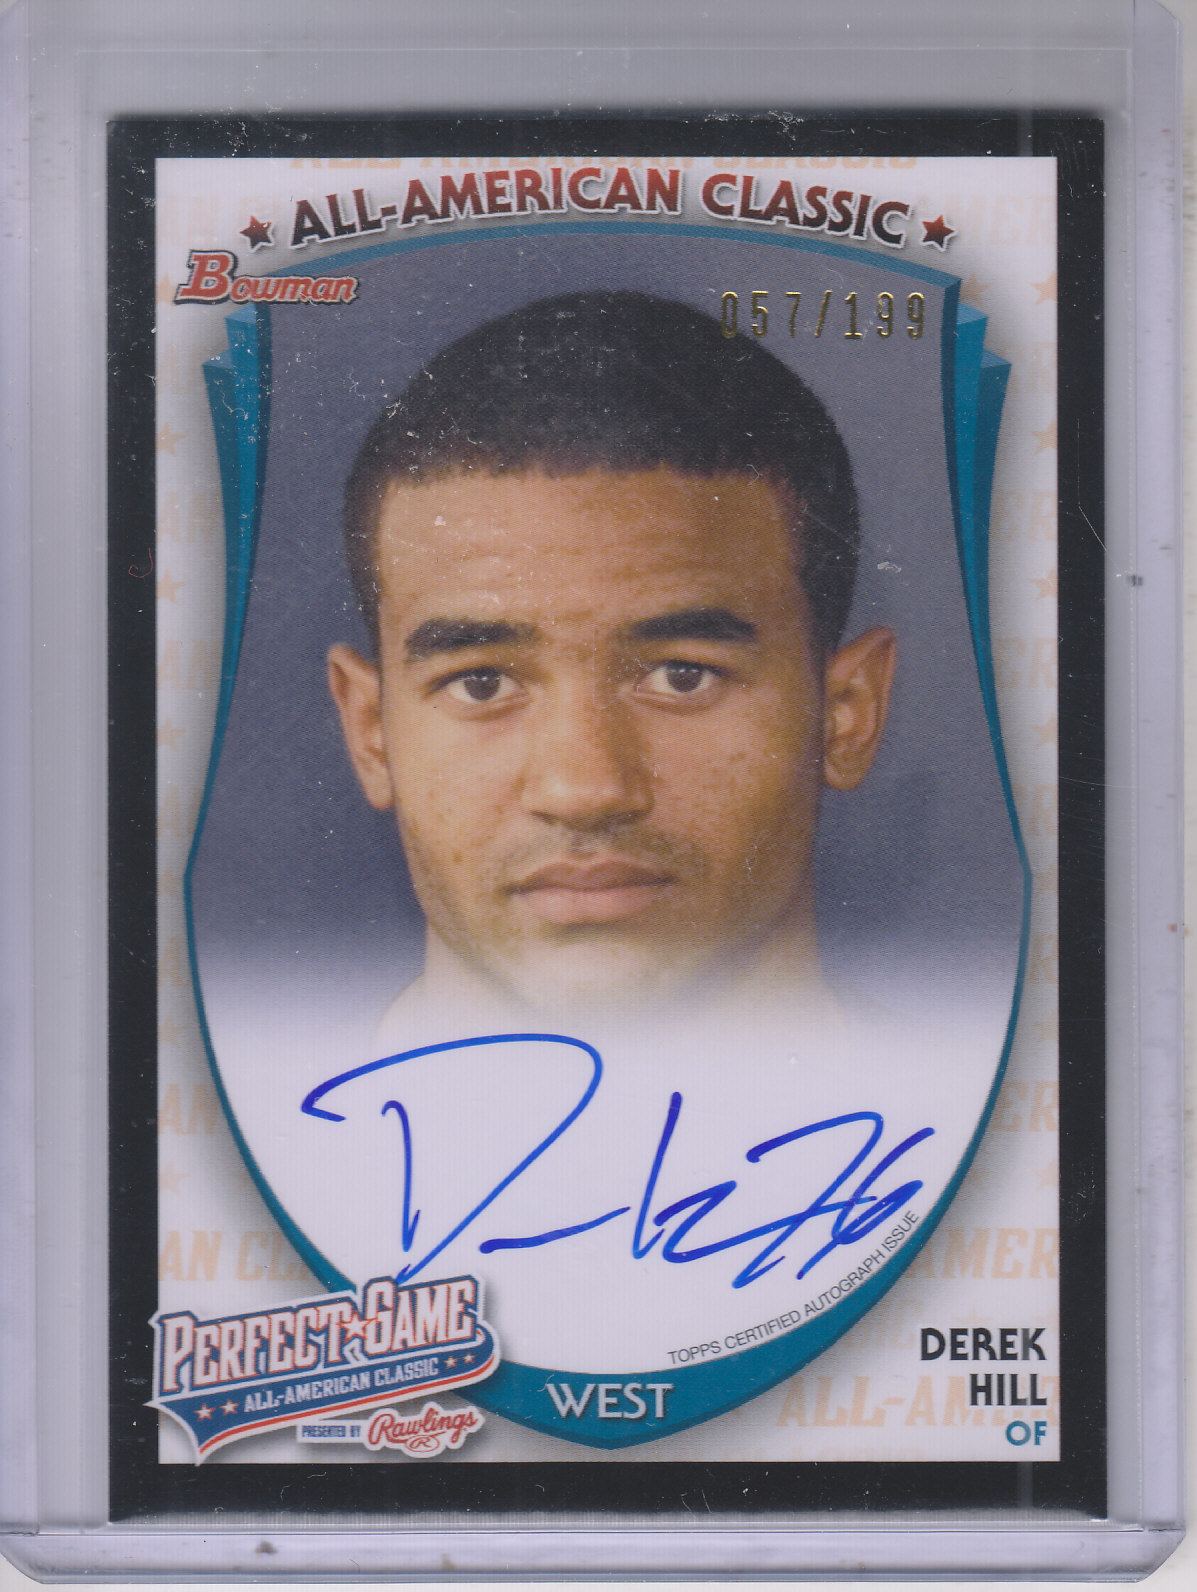 2013 Bowman Perfect Game All-American Classic Autographs #PGDH Derek Hill/199/Issued in 14 Bowman Draft